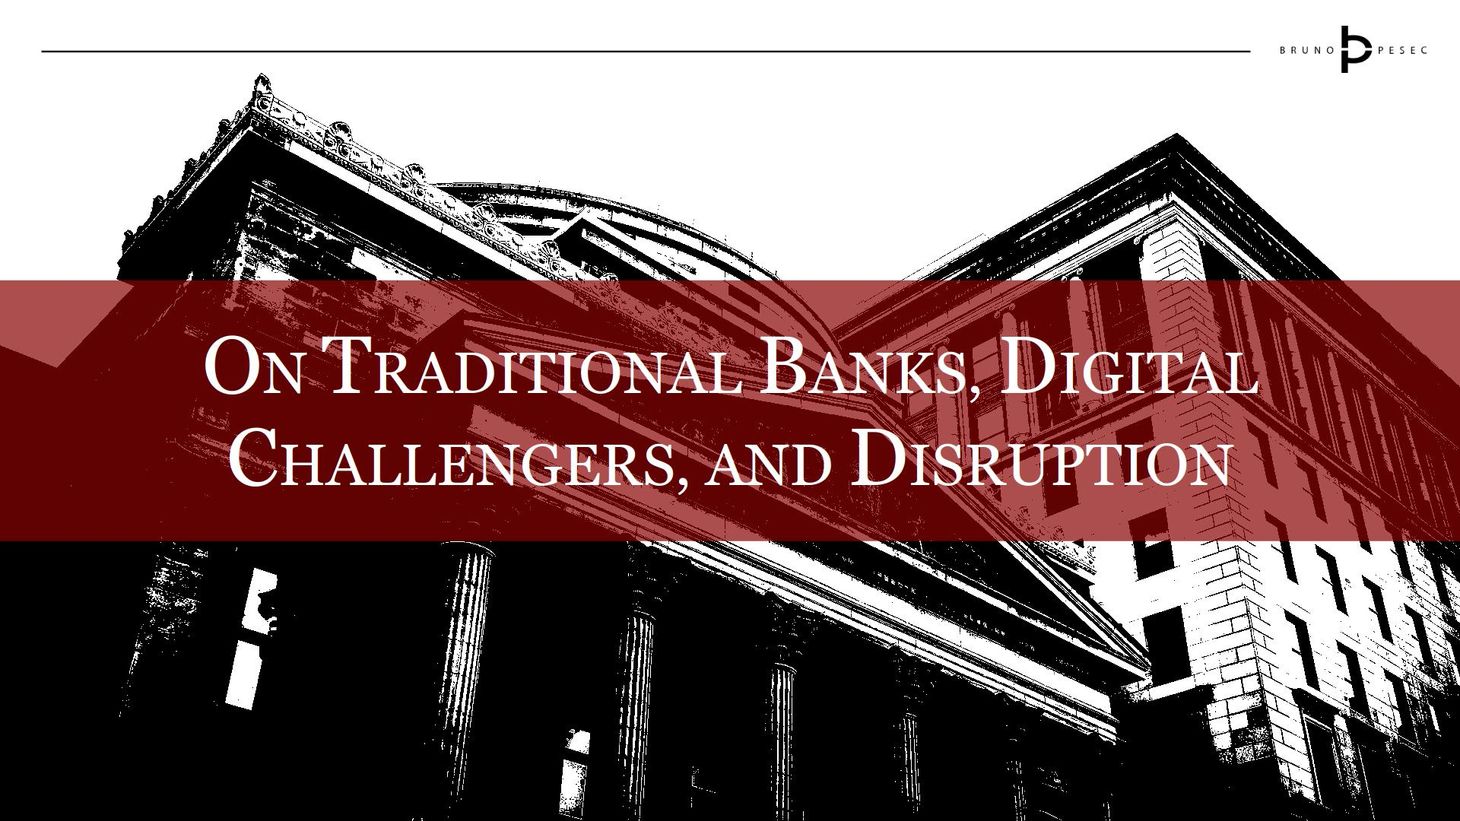 On traditional banks, digital challengers, and disruption